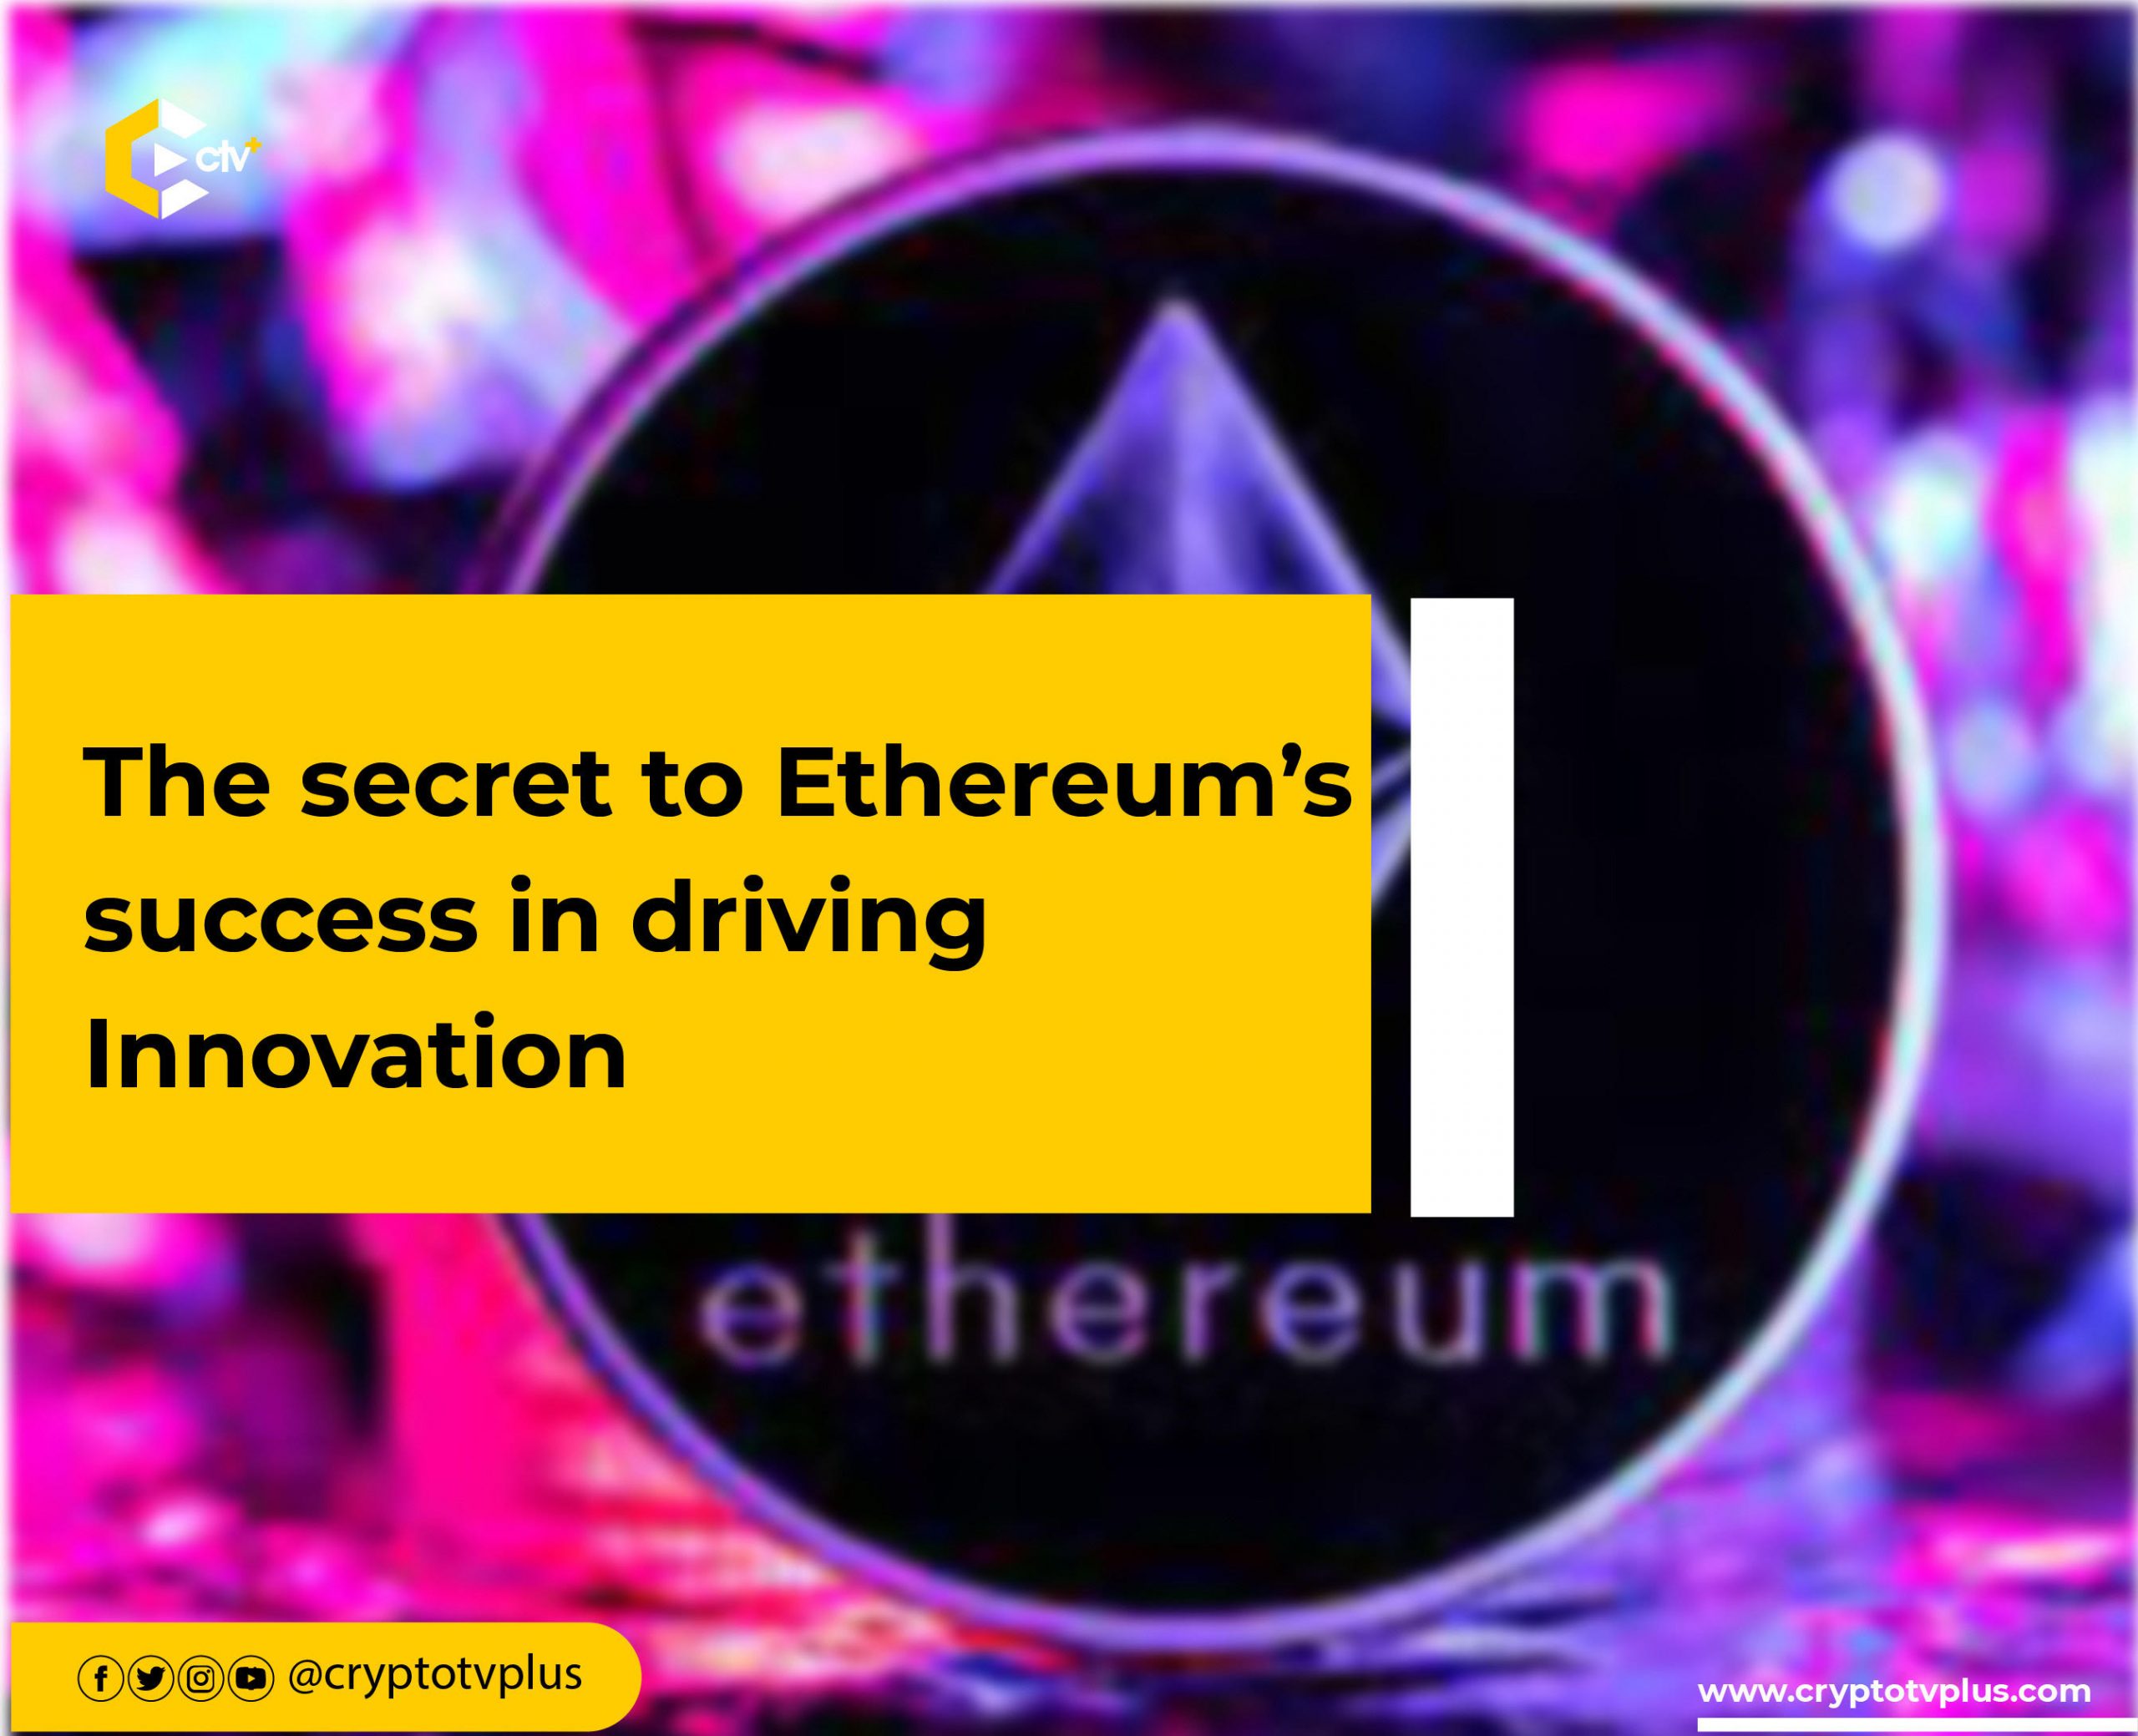 The secret to Ethereum's success in driving innovation